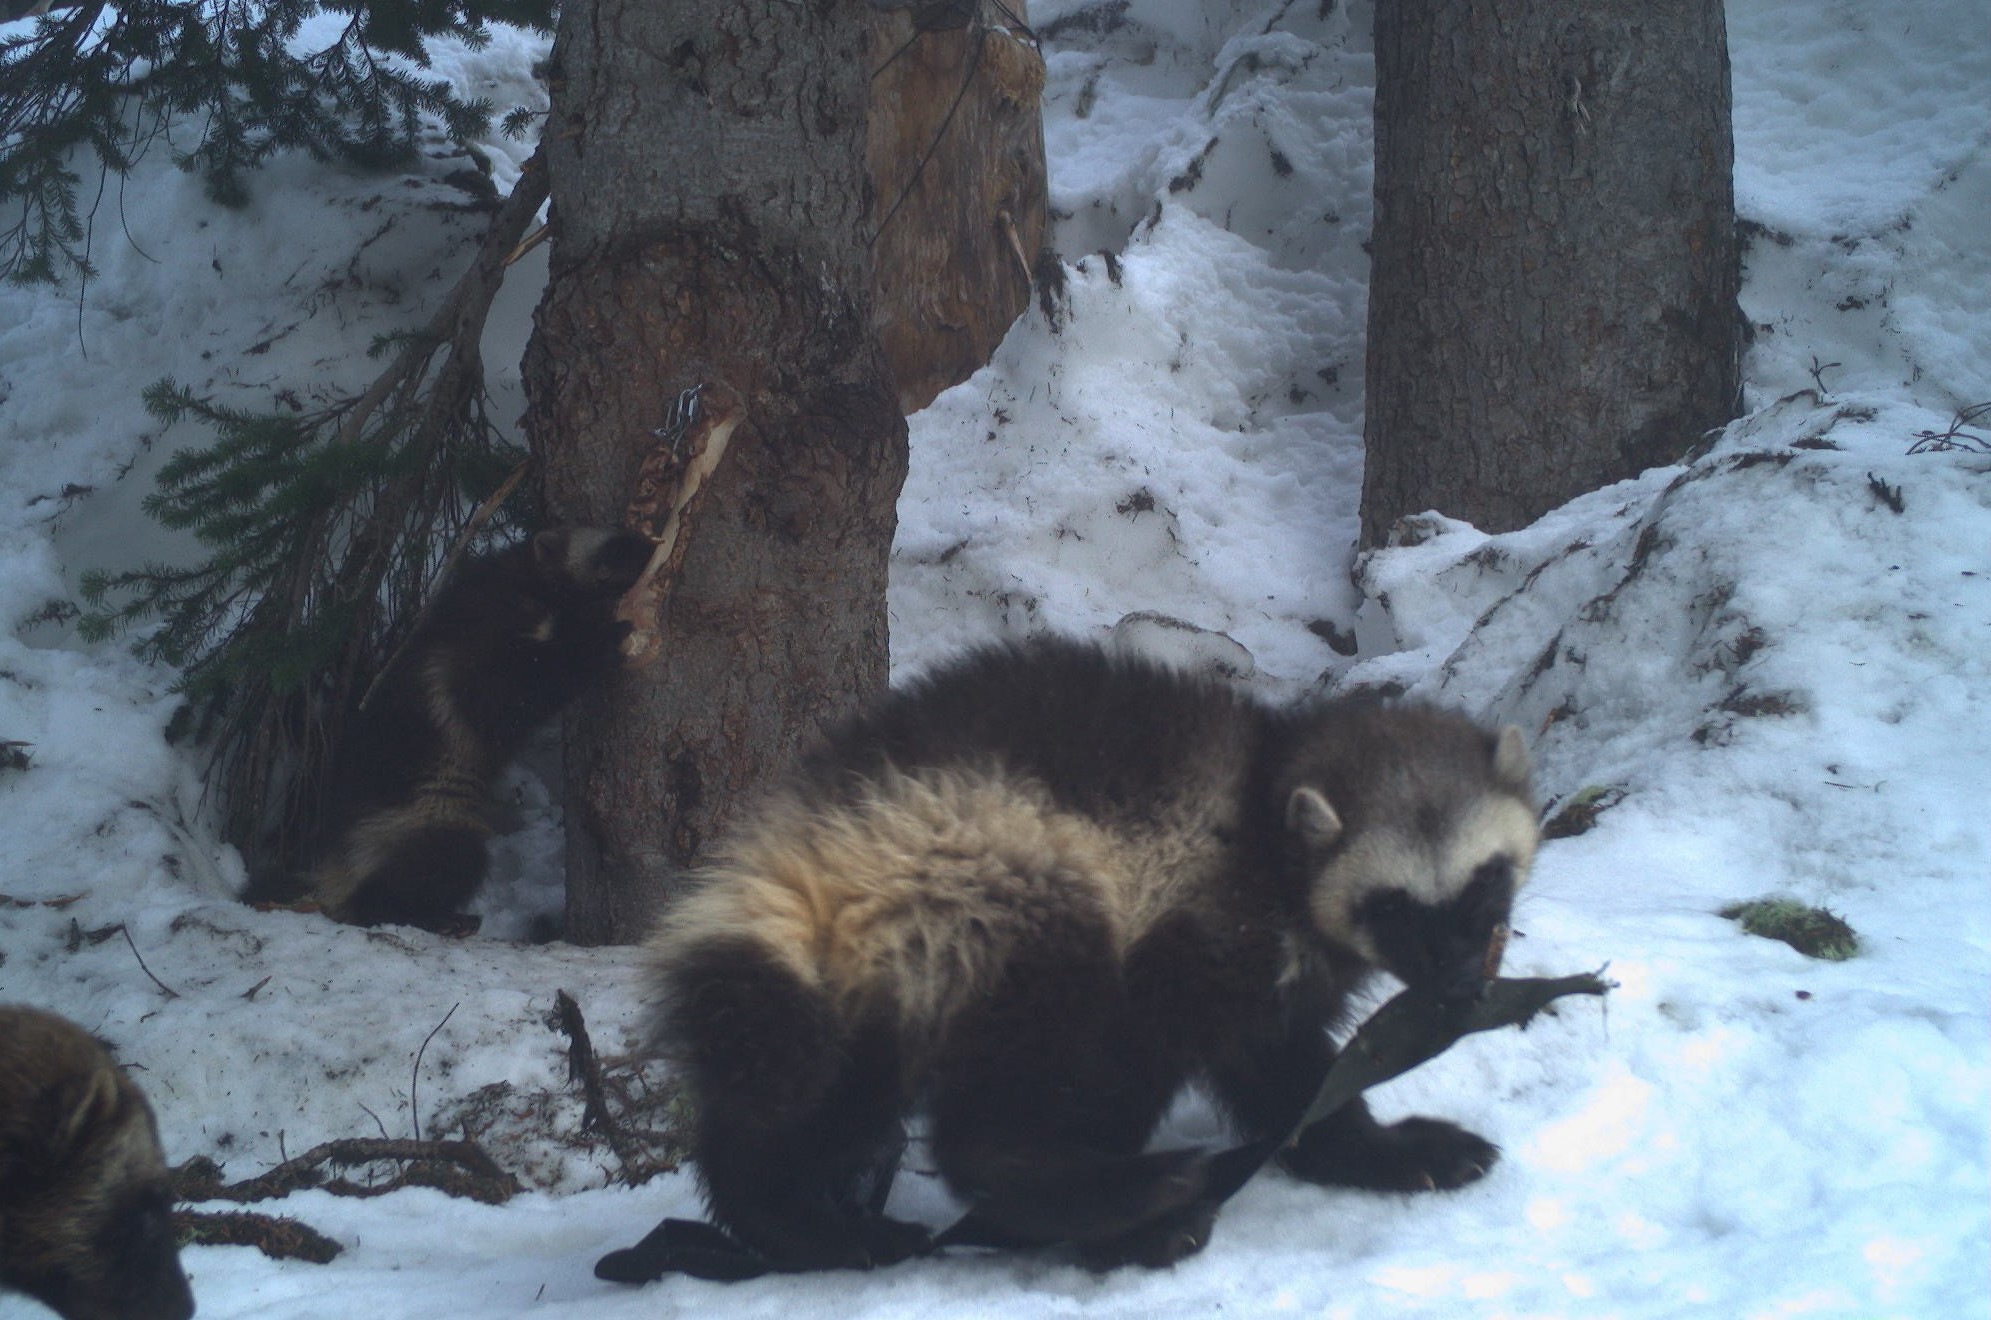 Two visible wolverines eat things near trees in the snow. A third wolverine is barely seen on the left side of the photo.